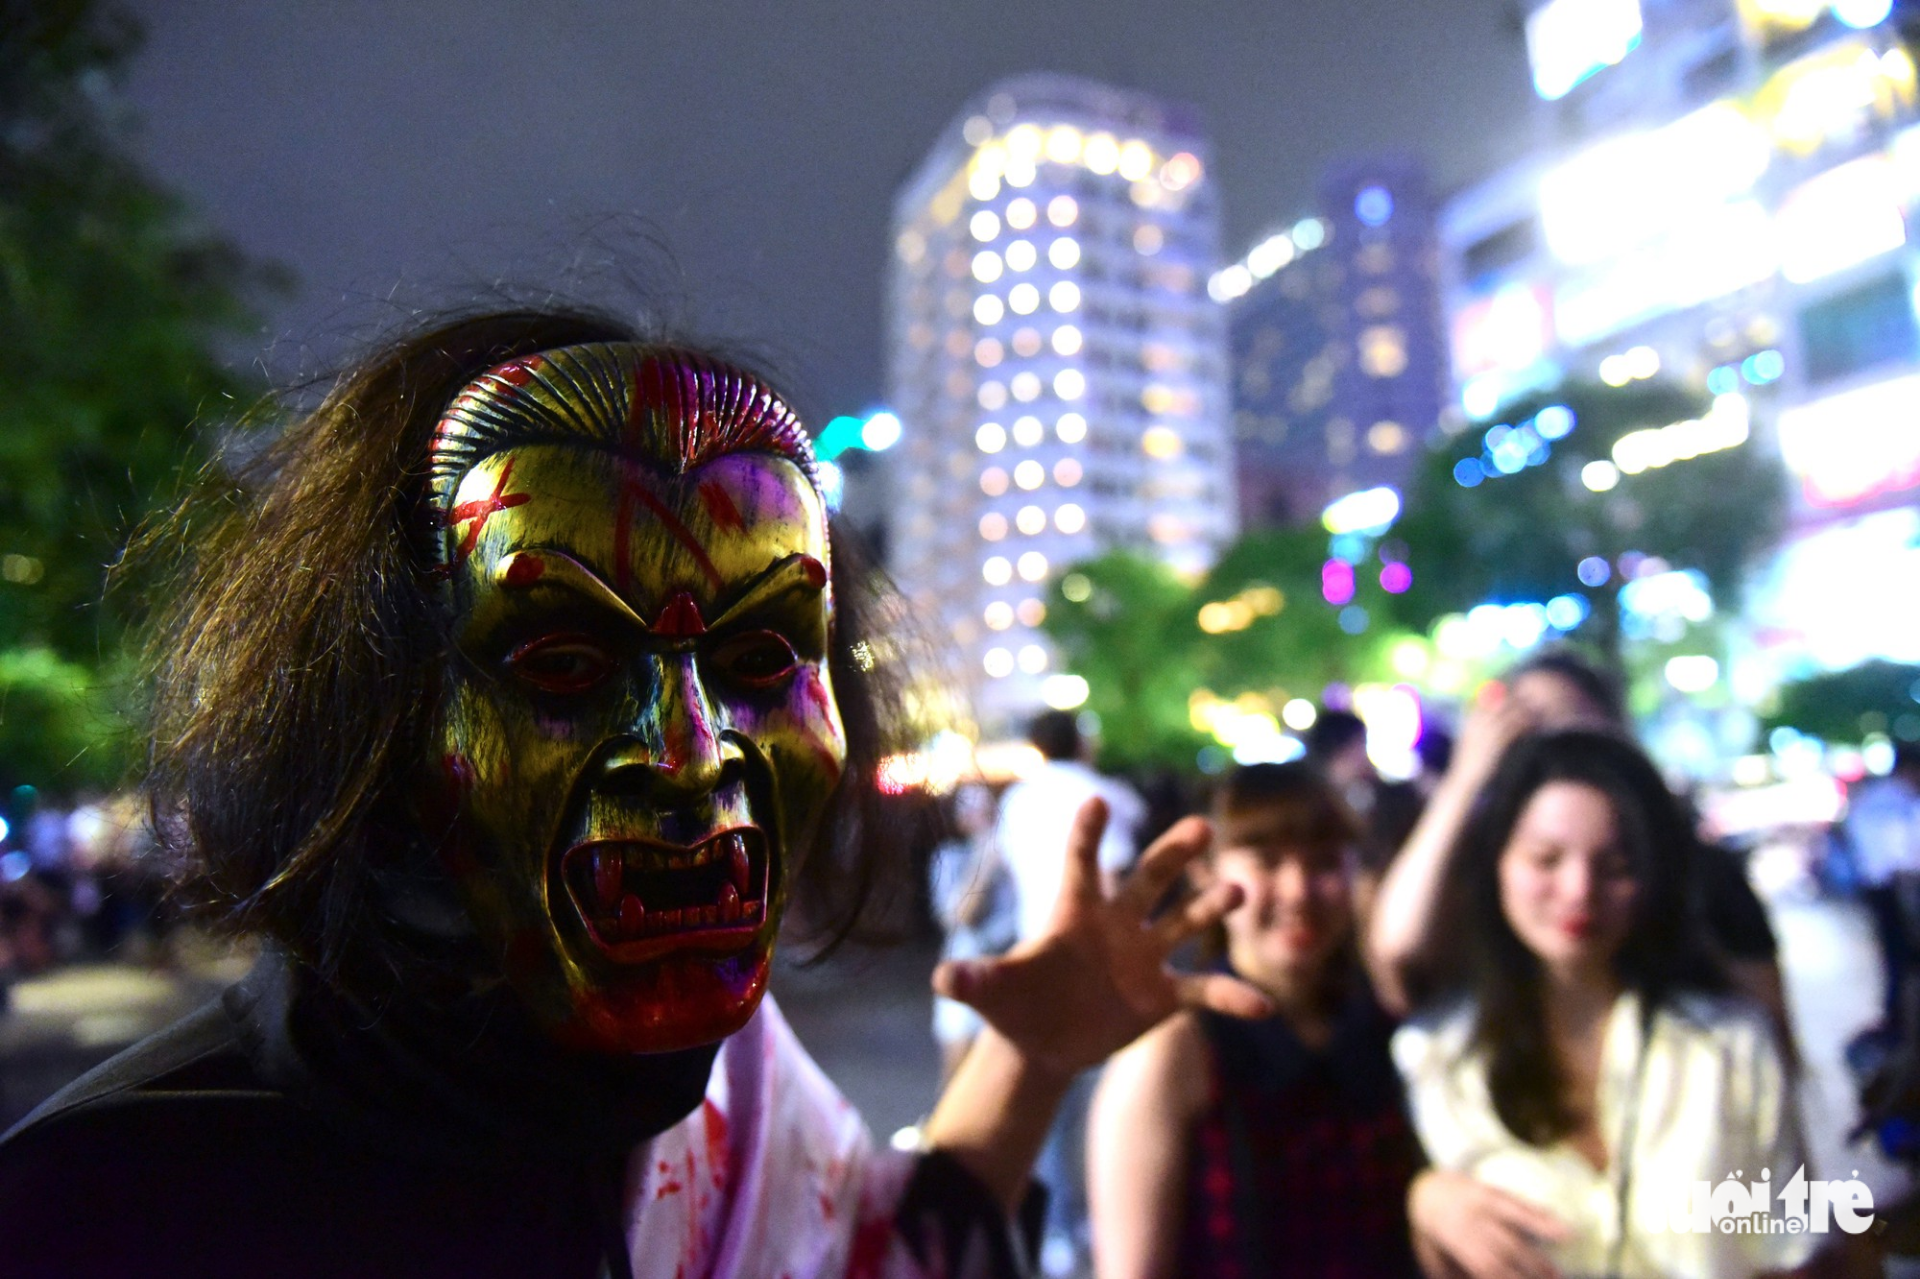 Locals put on various types of makeup and costumes.